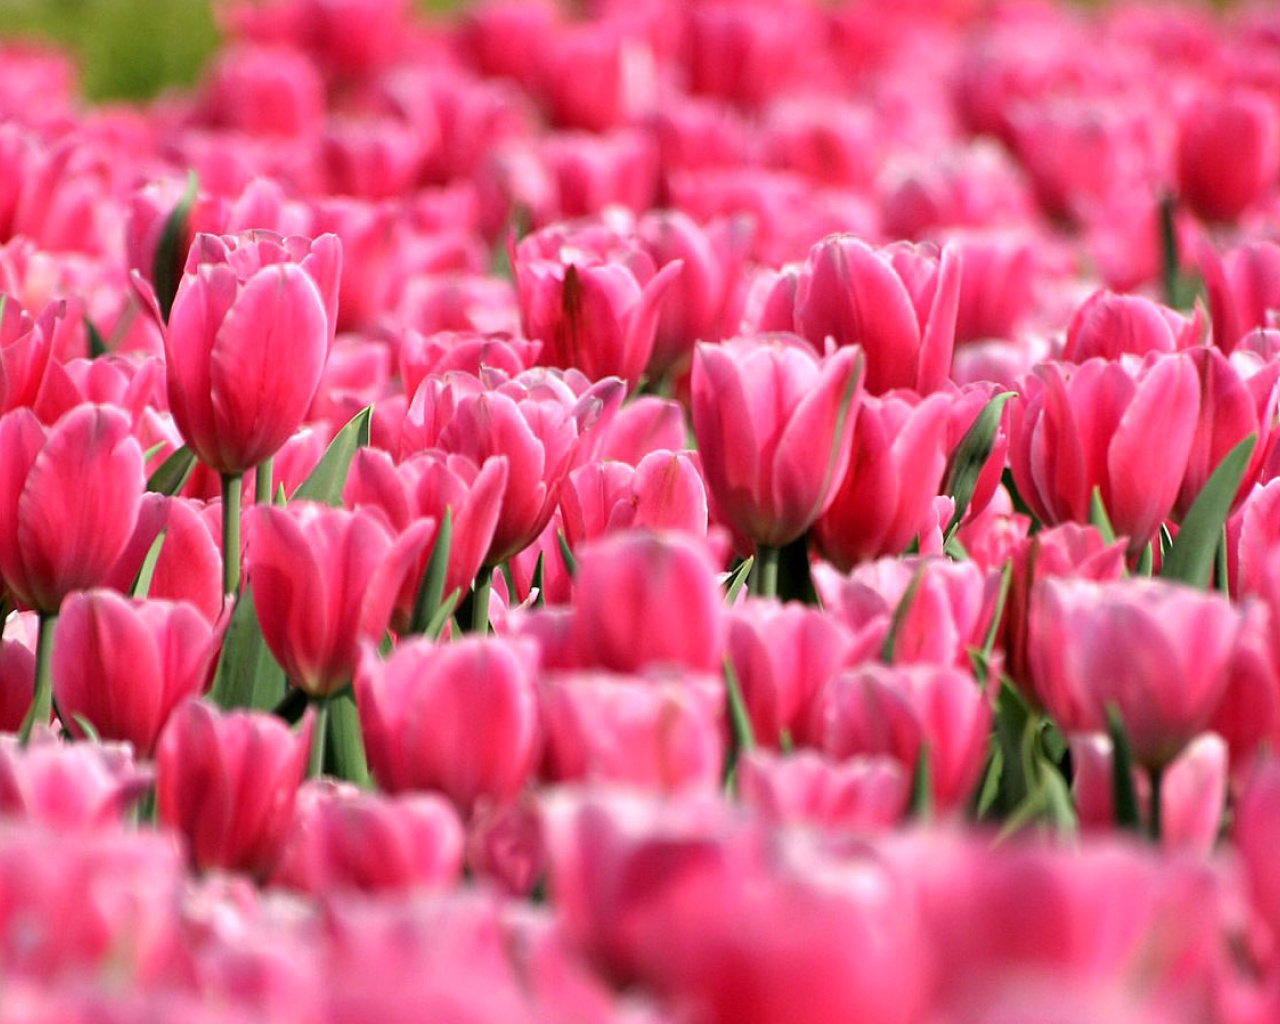 Pink Tulips in Holland Festival screenshot #1 1280x1024